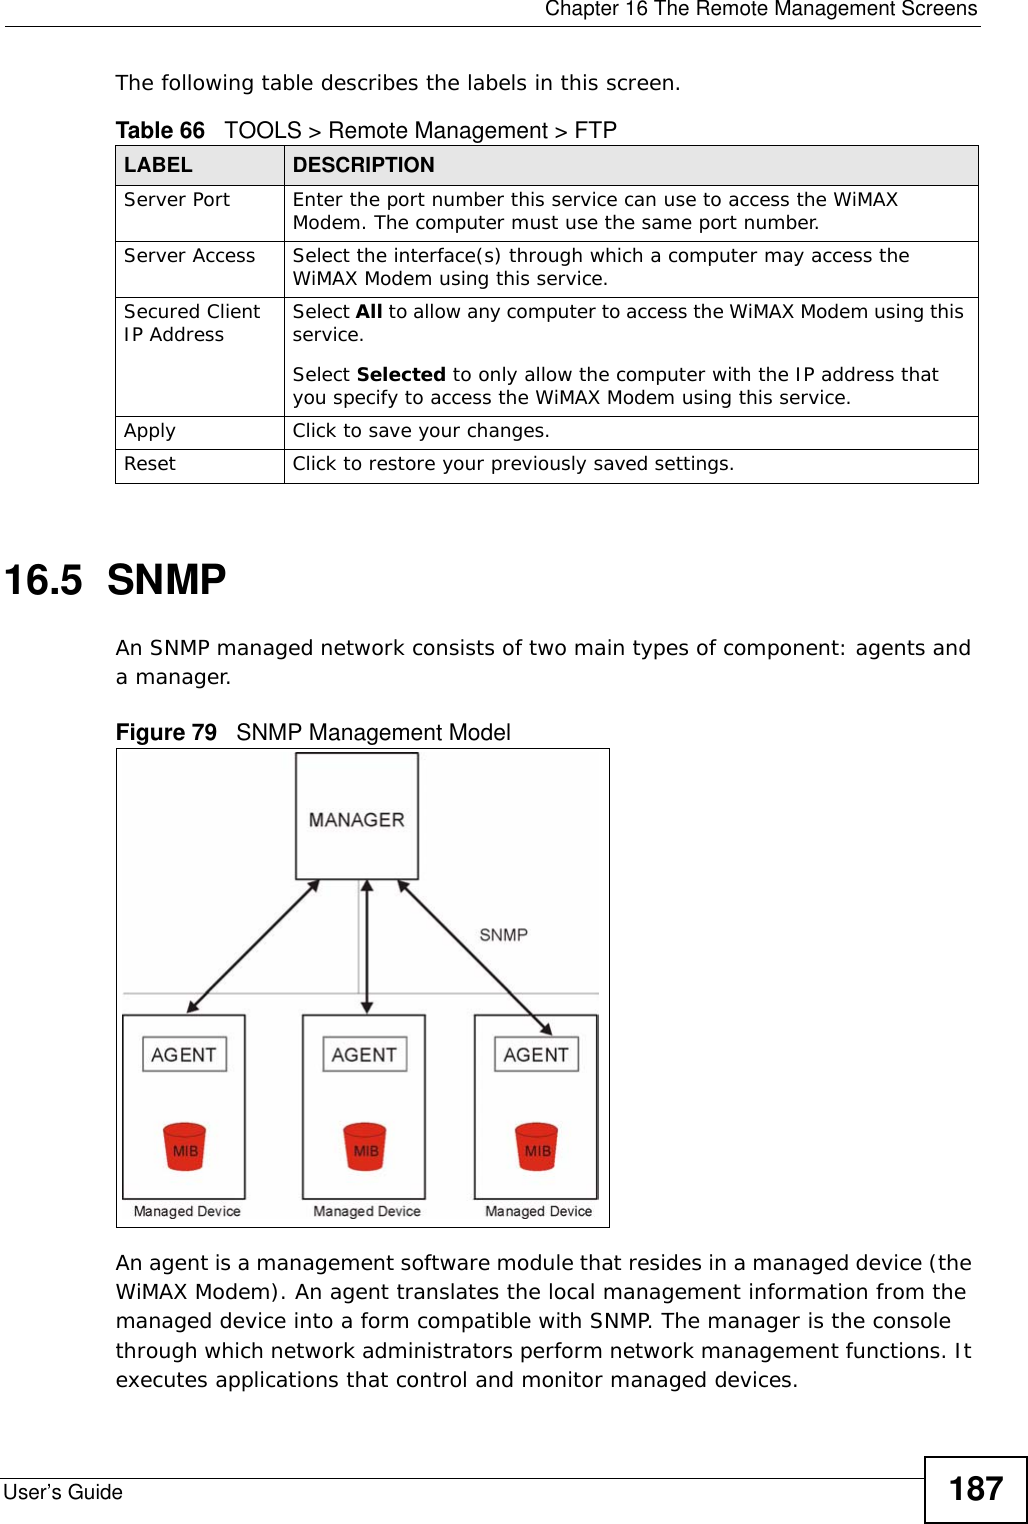  Chapter 16 The Remote Management ScreensUser’s Guide 187The following table describes the labels in this screen.16.5  SNMPAn SNMP managed network consists of two main types of component: agents and a manager.Figure 79   SNMP Management ModelAn agent is a management software module that resides in a managed device (the WiMAX Modem). An agent translates the local management information from the managed device into a form compatible with SNMP. The manager is the console through which network administrators perform network management functions. It executes applications that control and monitor managed devices. Table 66   TOOLS &gt; Remote Management &gt; FTPLABEL DESCRIPTIONServer Port Enter the port number this service can use to access the WiMAX Modem. The computer must use the same port number.Server Access Select the interface(s) through which a computer may access the WiMAX Modem using this service.Secured Client IP Address Select All to allow any computer to access the WiMAX Modem using this service.Select Selected to only allow the computer with the IP address that you specify to access the WiMAX Modem using this service.Apply Click to save your changes.Reset Click to restore your previously saved settings.